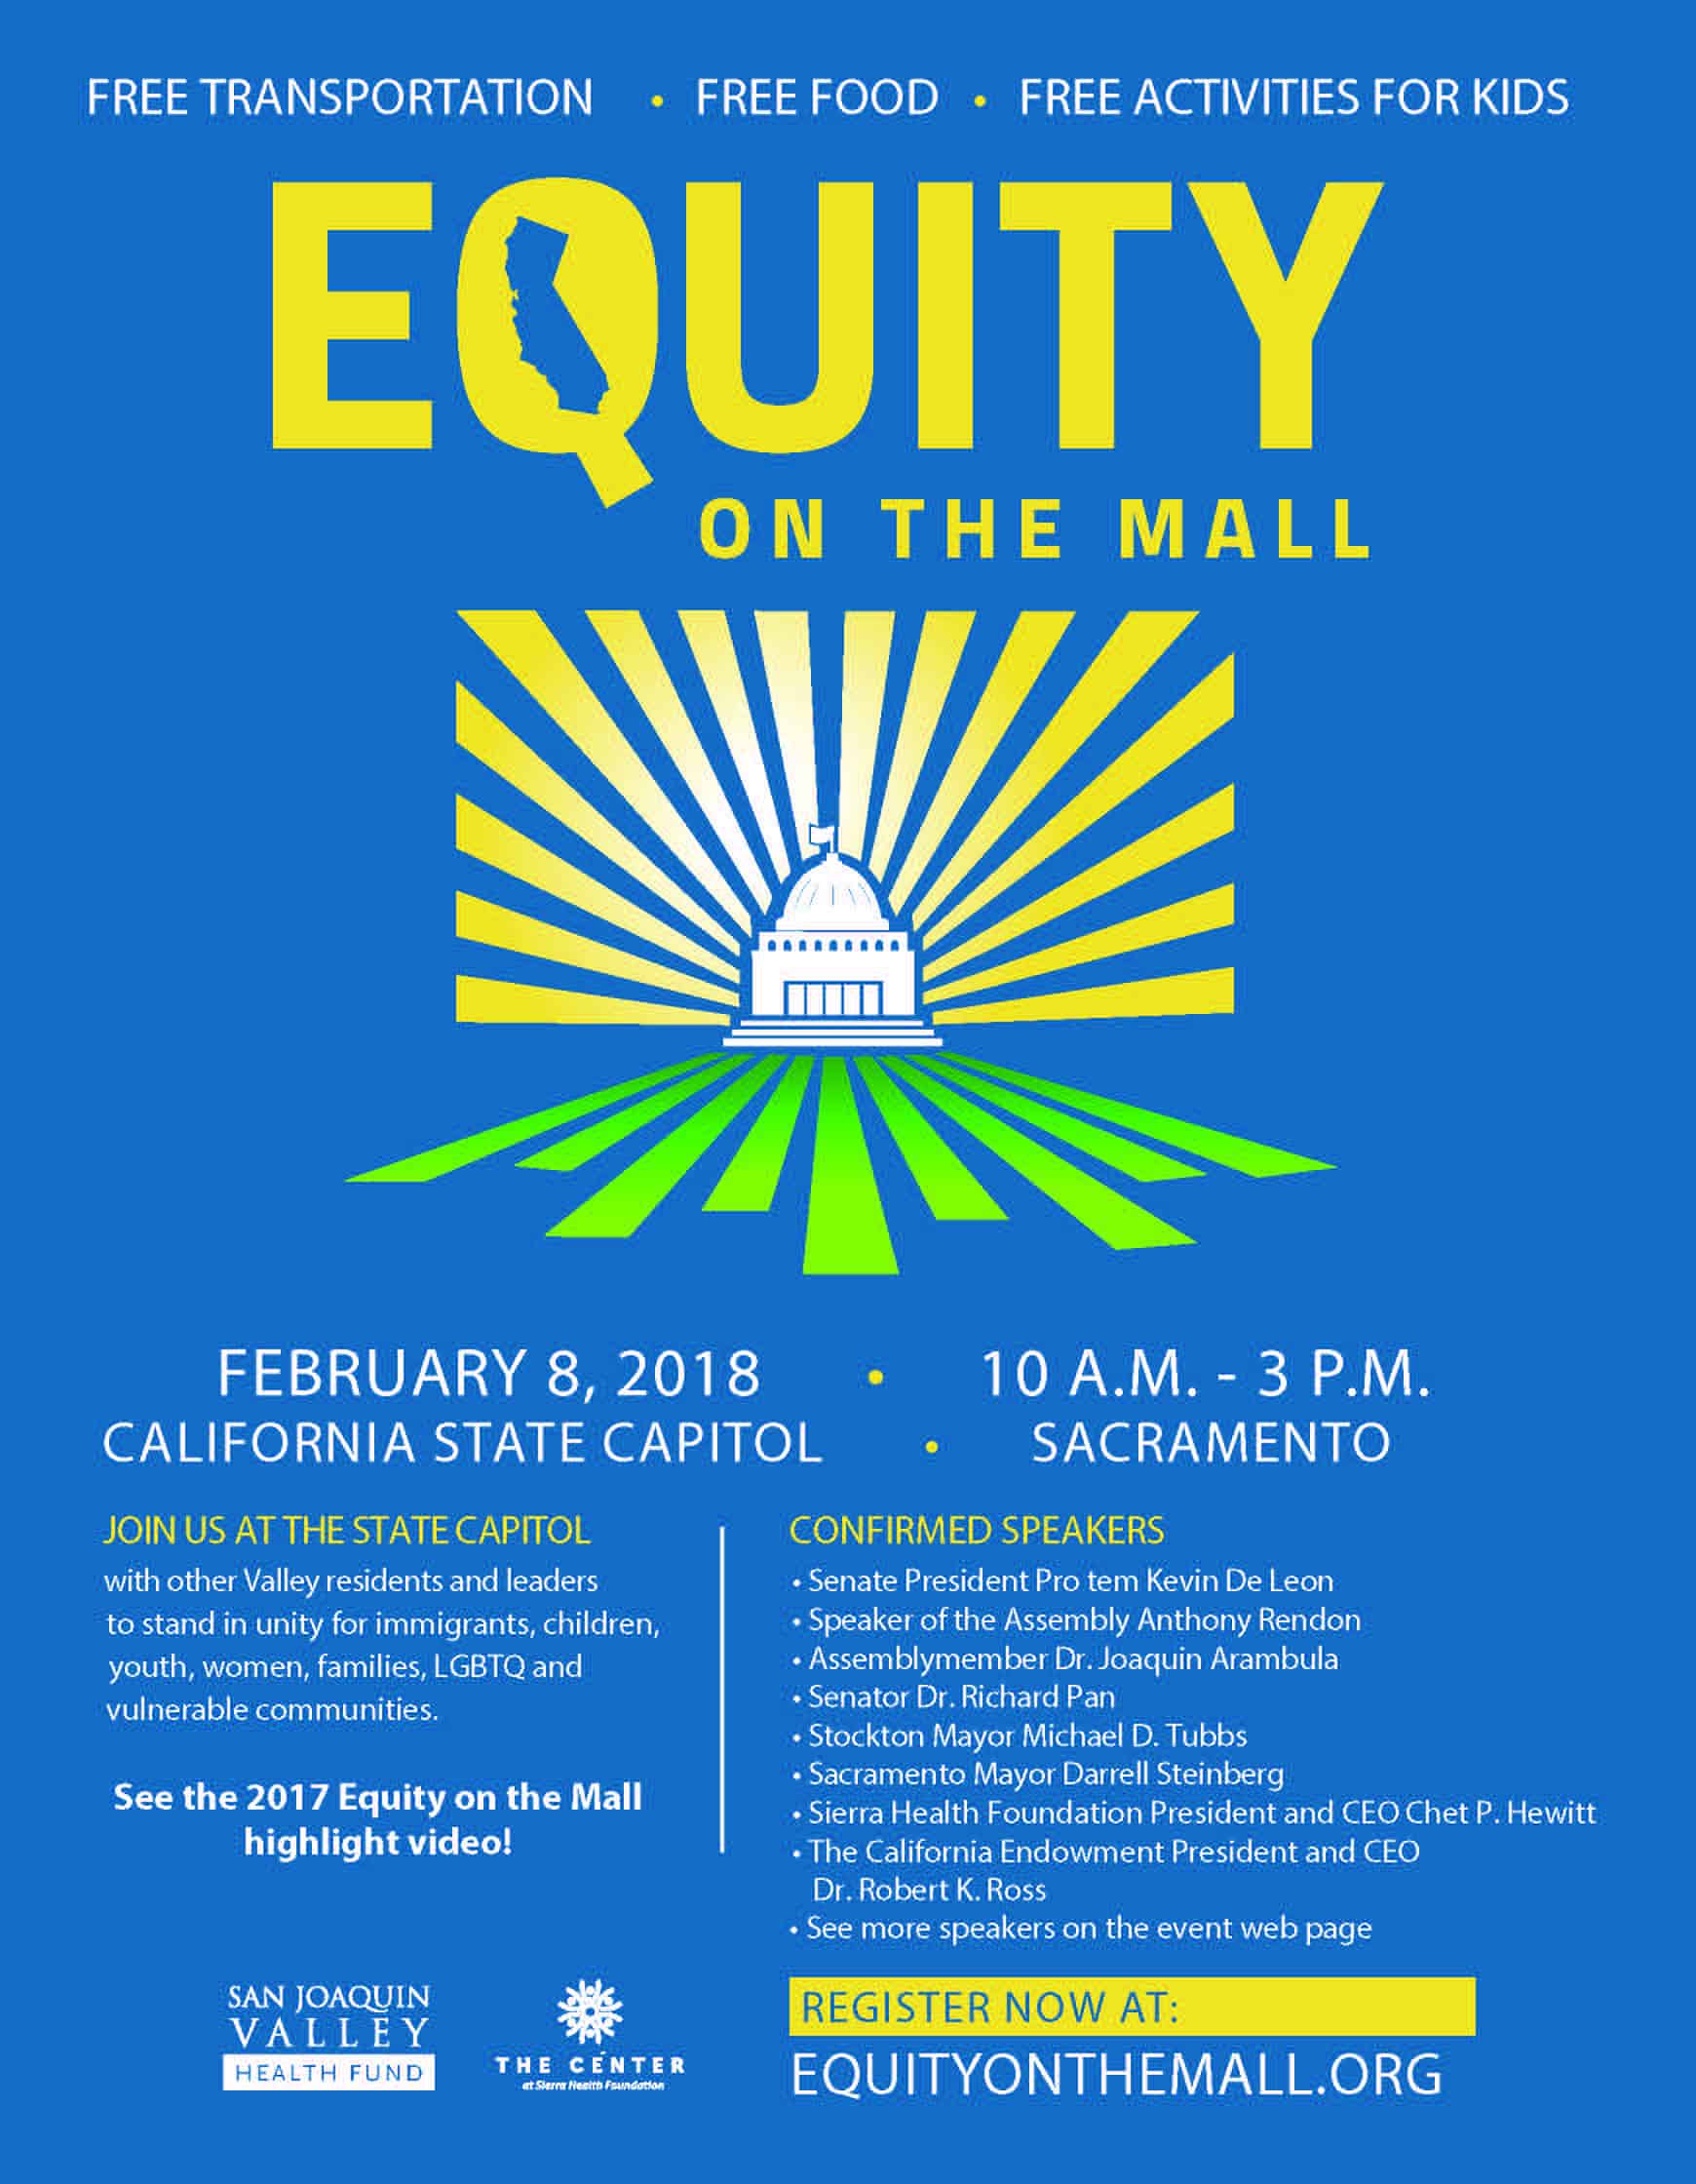 CVIIC Participates in Equity on the Mall 2018